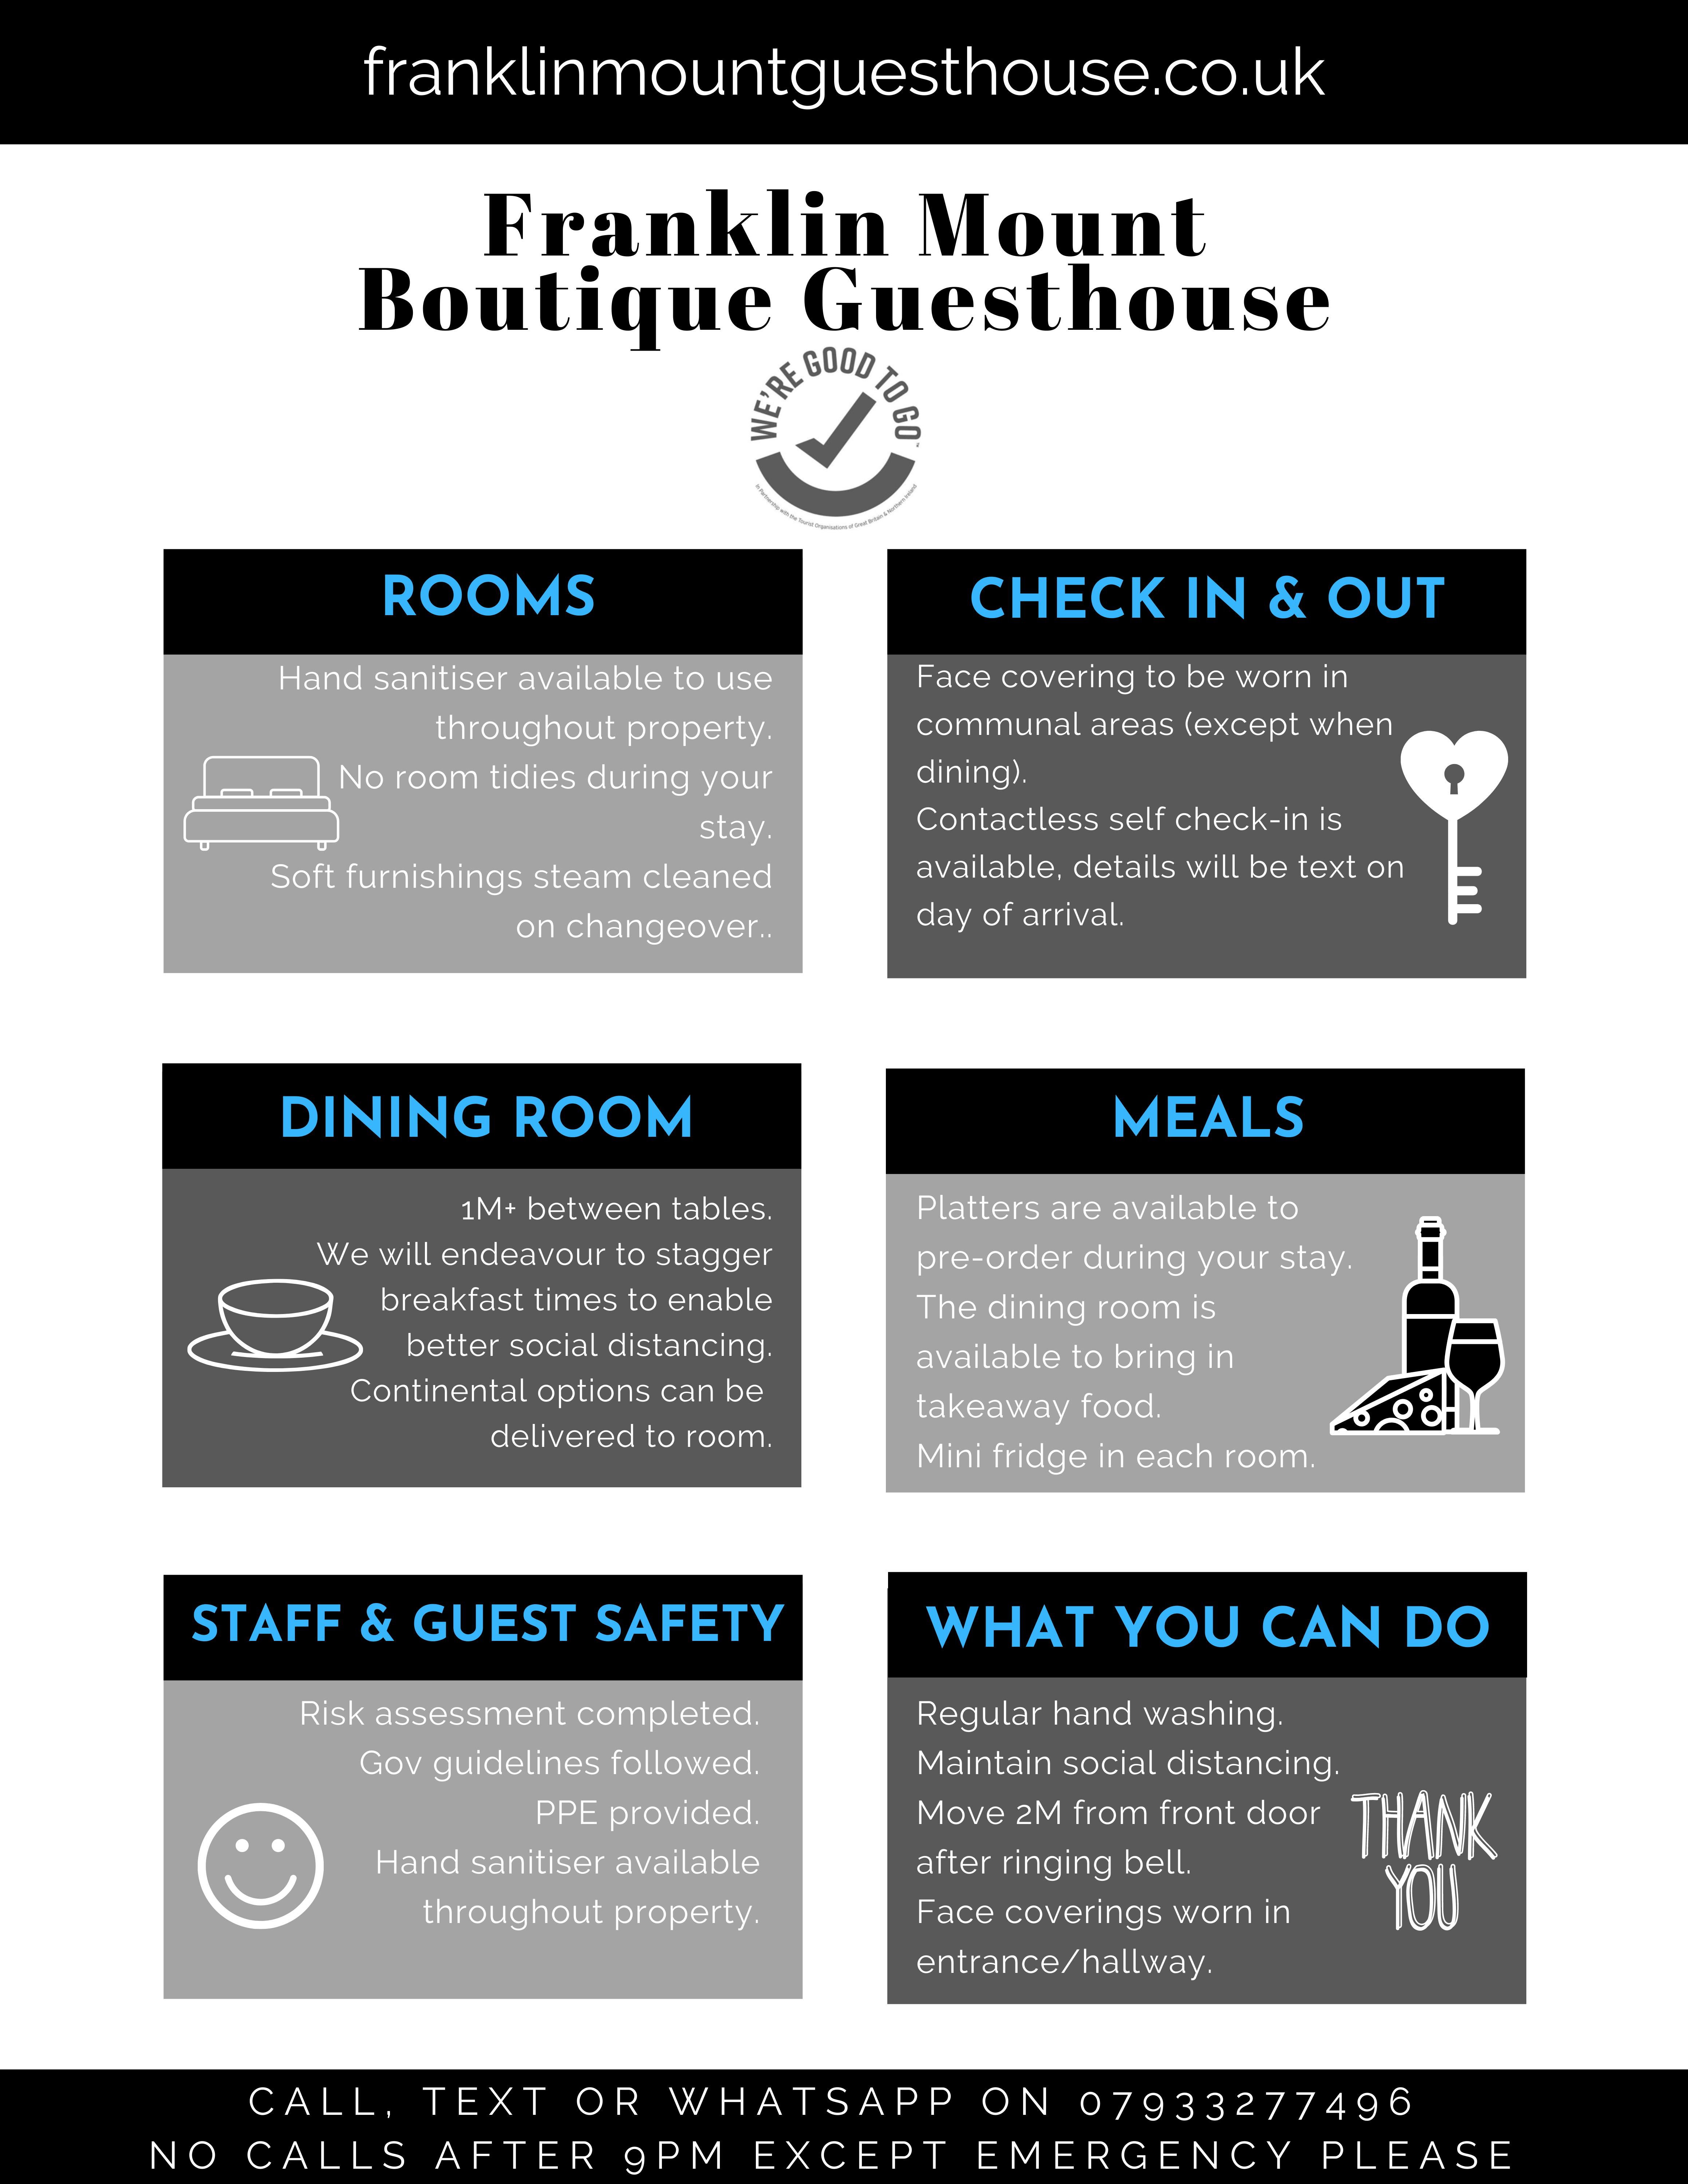 Franklin Mount Boutique Guesthouse covid guidelines